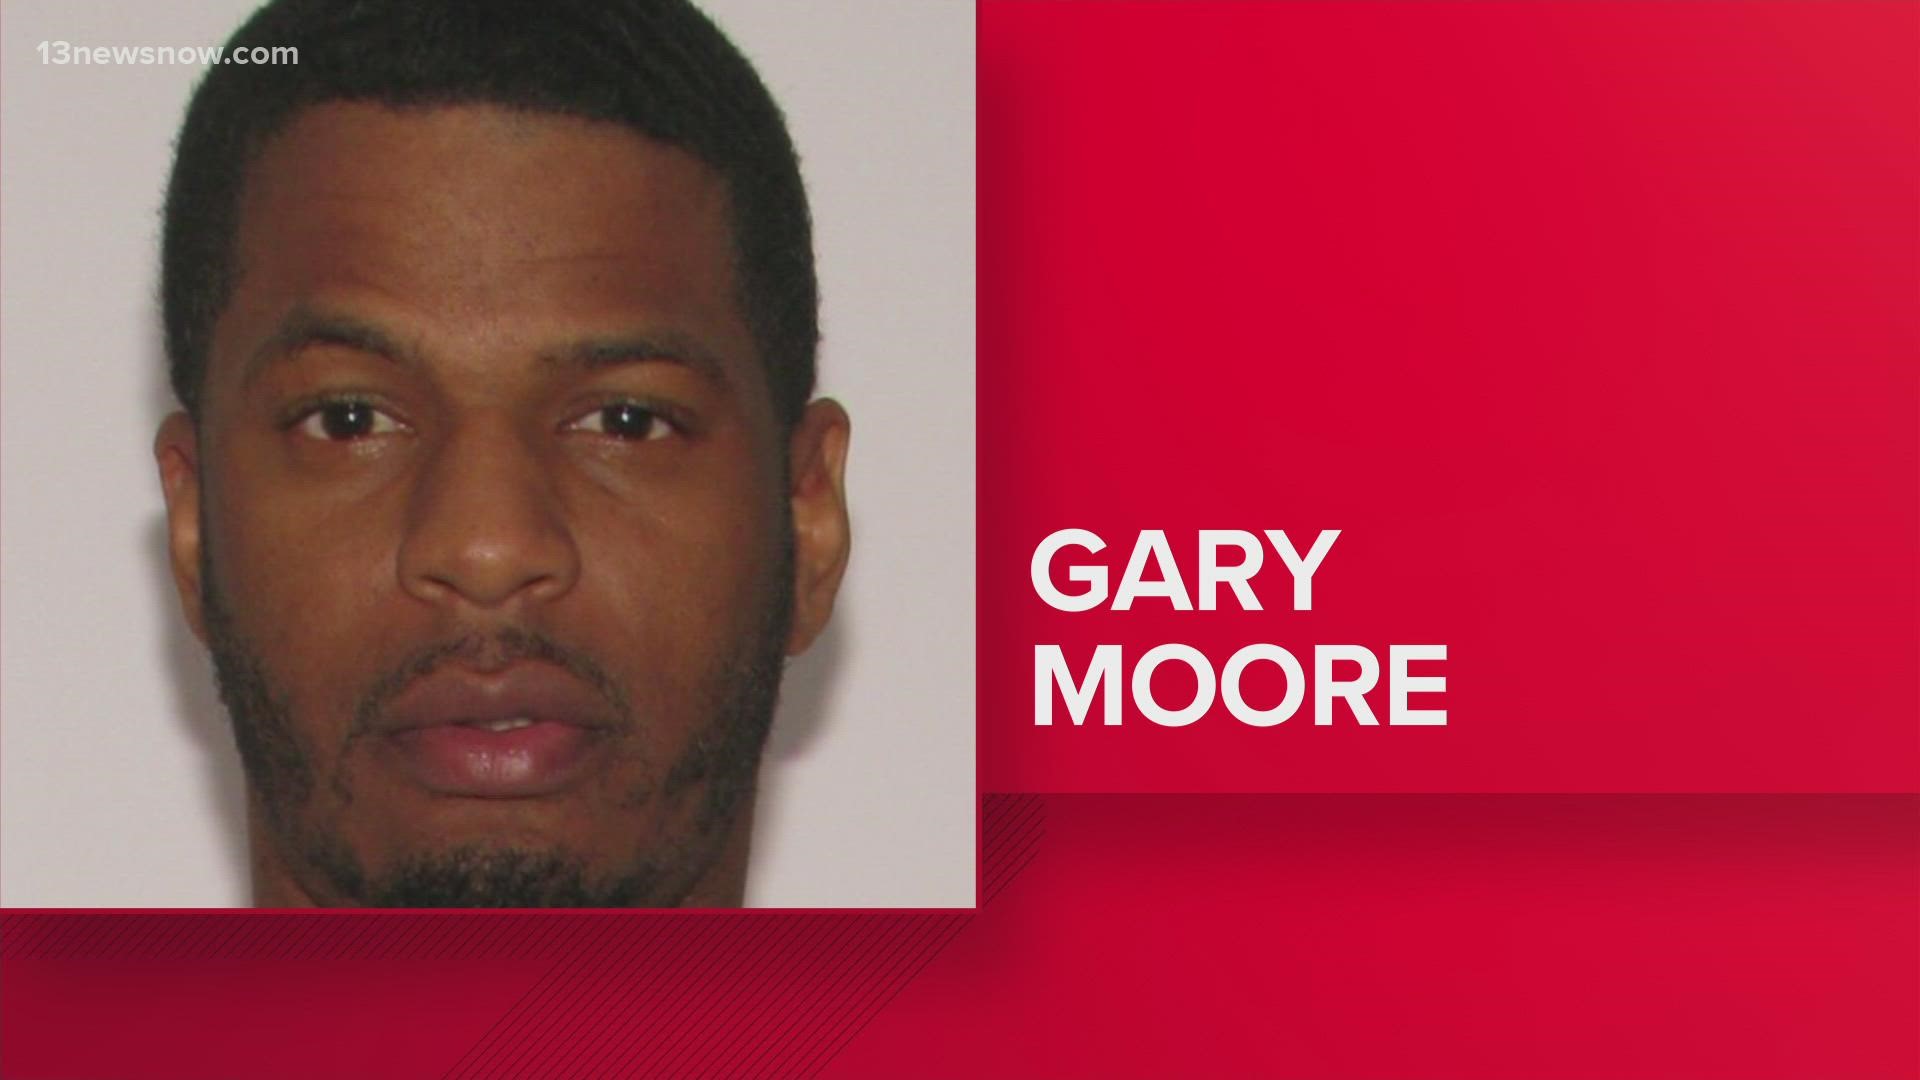 Gary Moore, 39, is wanted on charges including Second-degree Murder. One person died, and others were hurt.